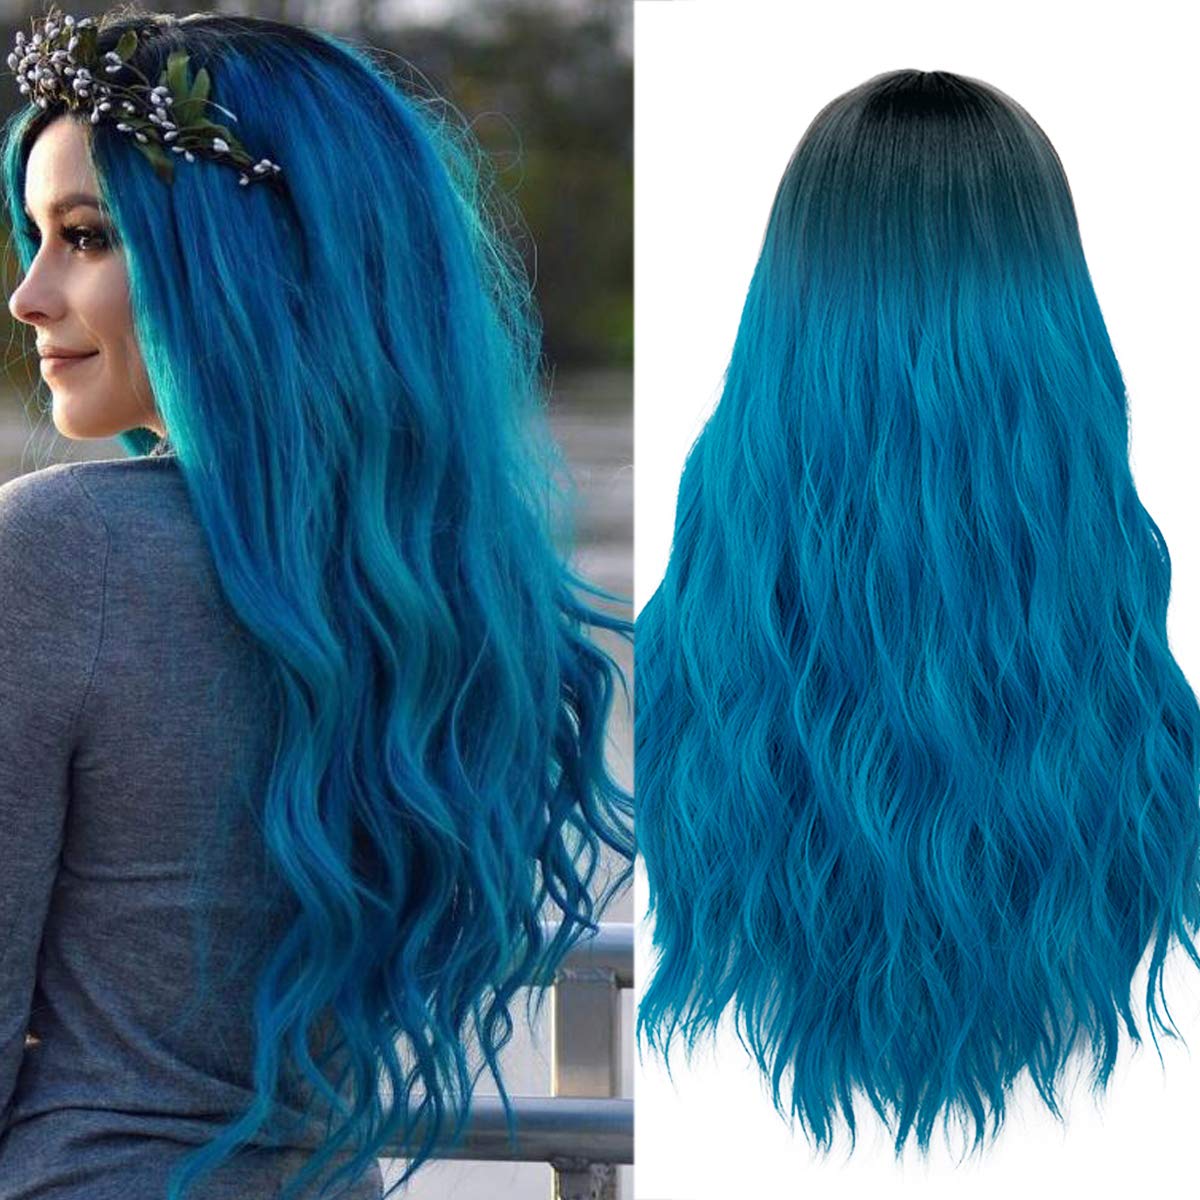 Price:$22.85     Mildiso Long Blue Wigs for Women Ombre Colorful Pastel Curly Wavy Hair Wig Cute Natural Looking Perfect for Daily Party Cosplay 052B   Beauty